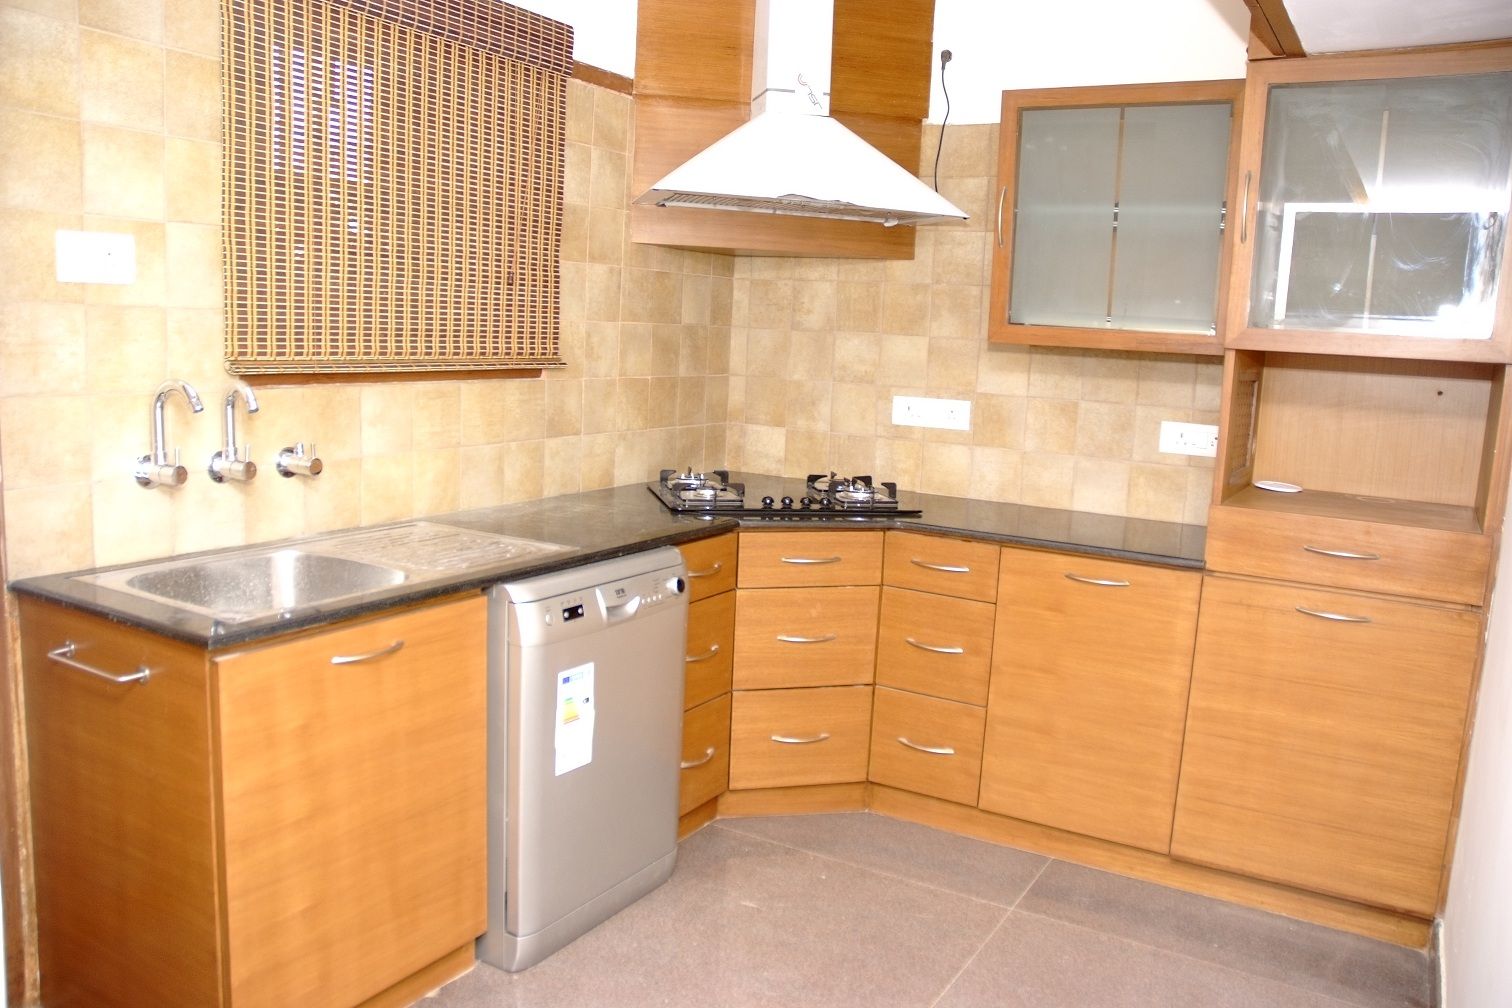 Contemporary L Shaped Kitchen Designs homify Asian style kitchen Plywood L shaped kitchen